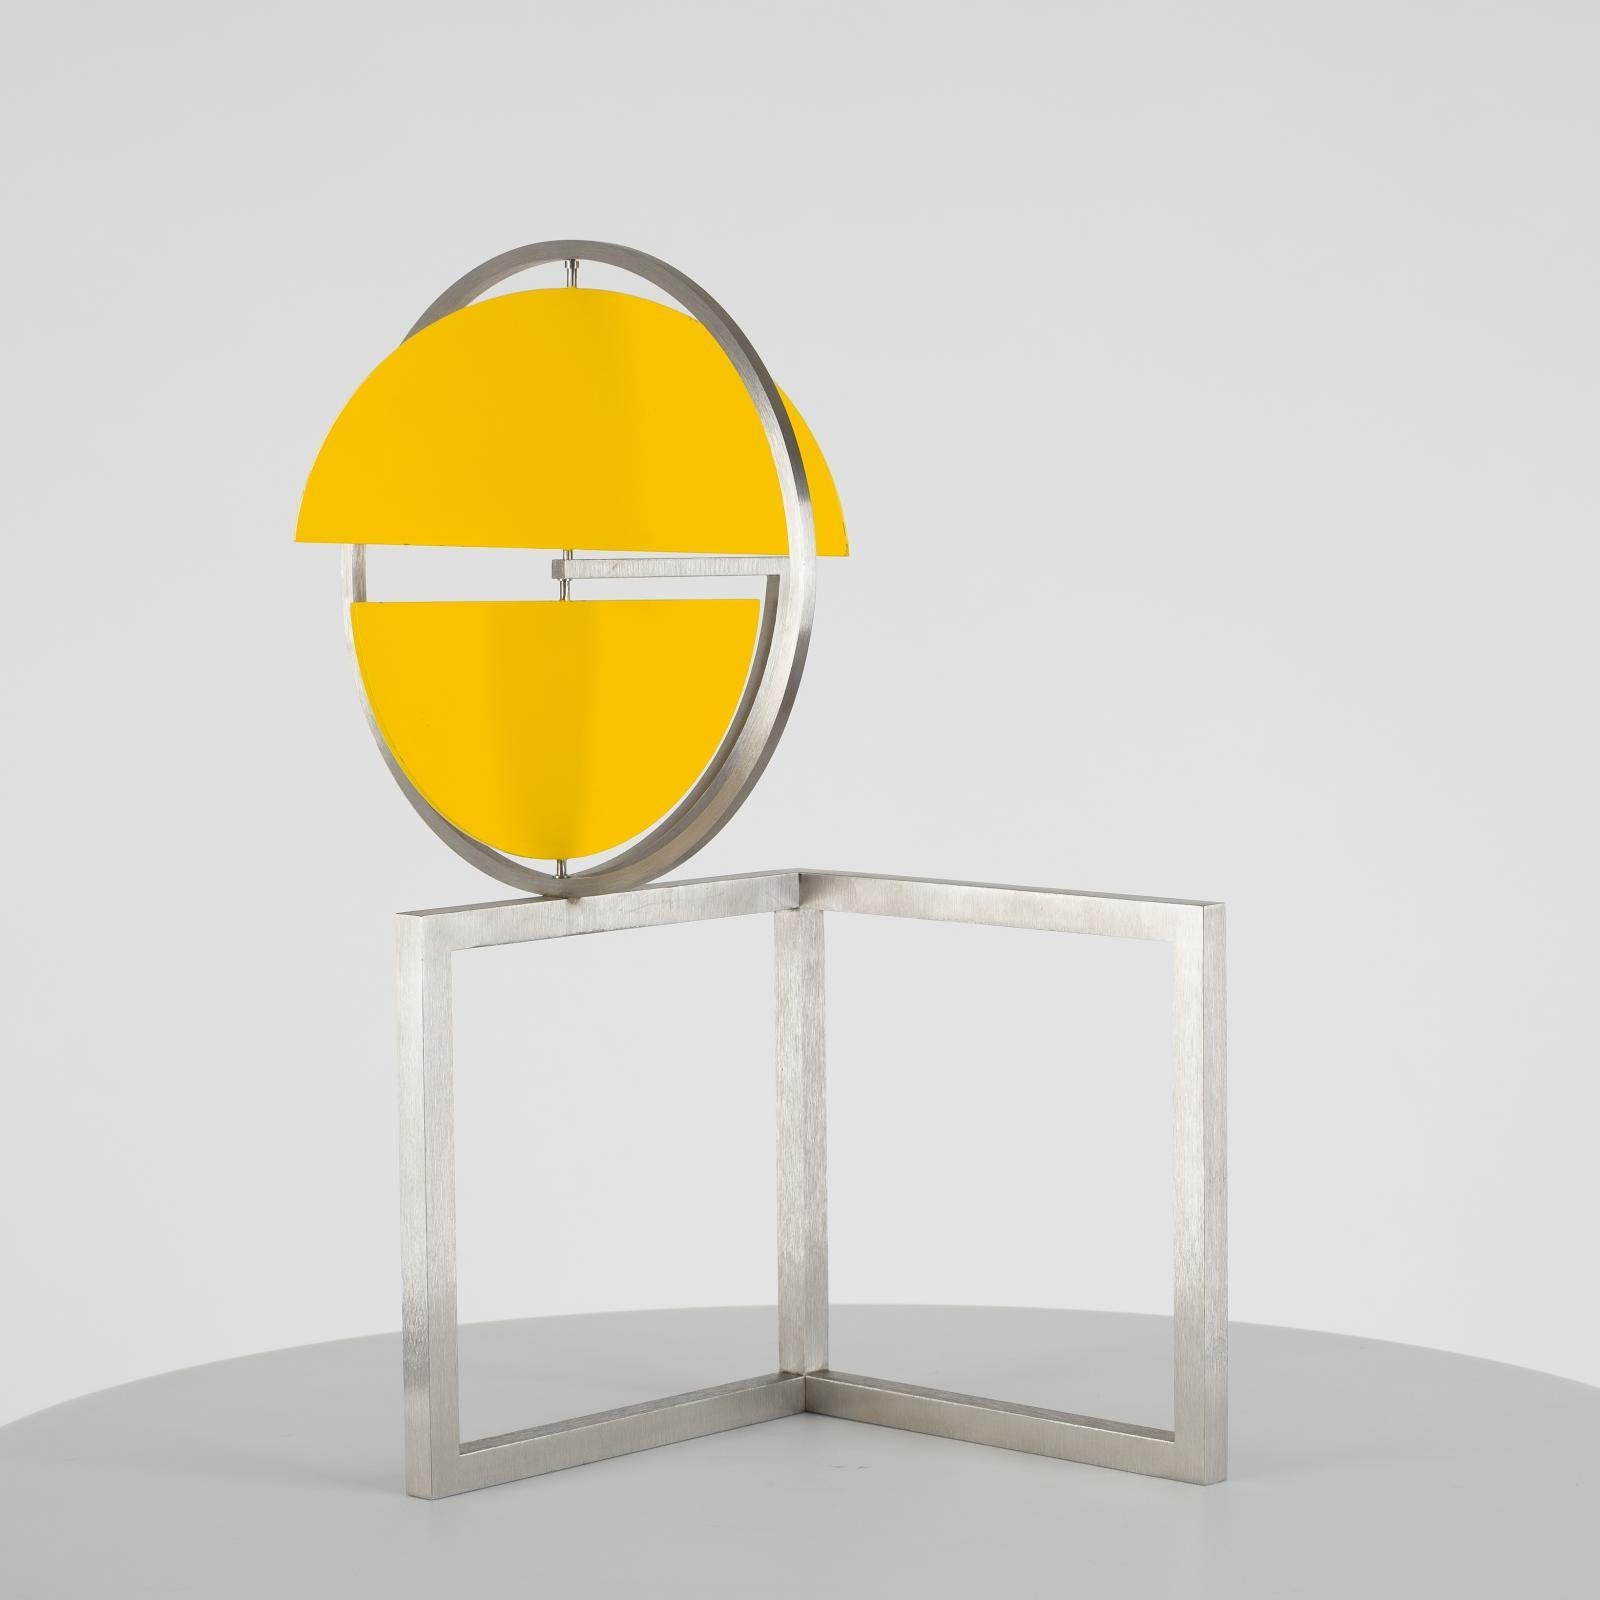 Roger Phillips Abstract Sculpture - Yellow Disc on Two Squares, kinetic sculpture